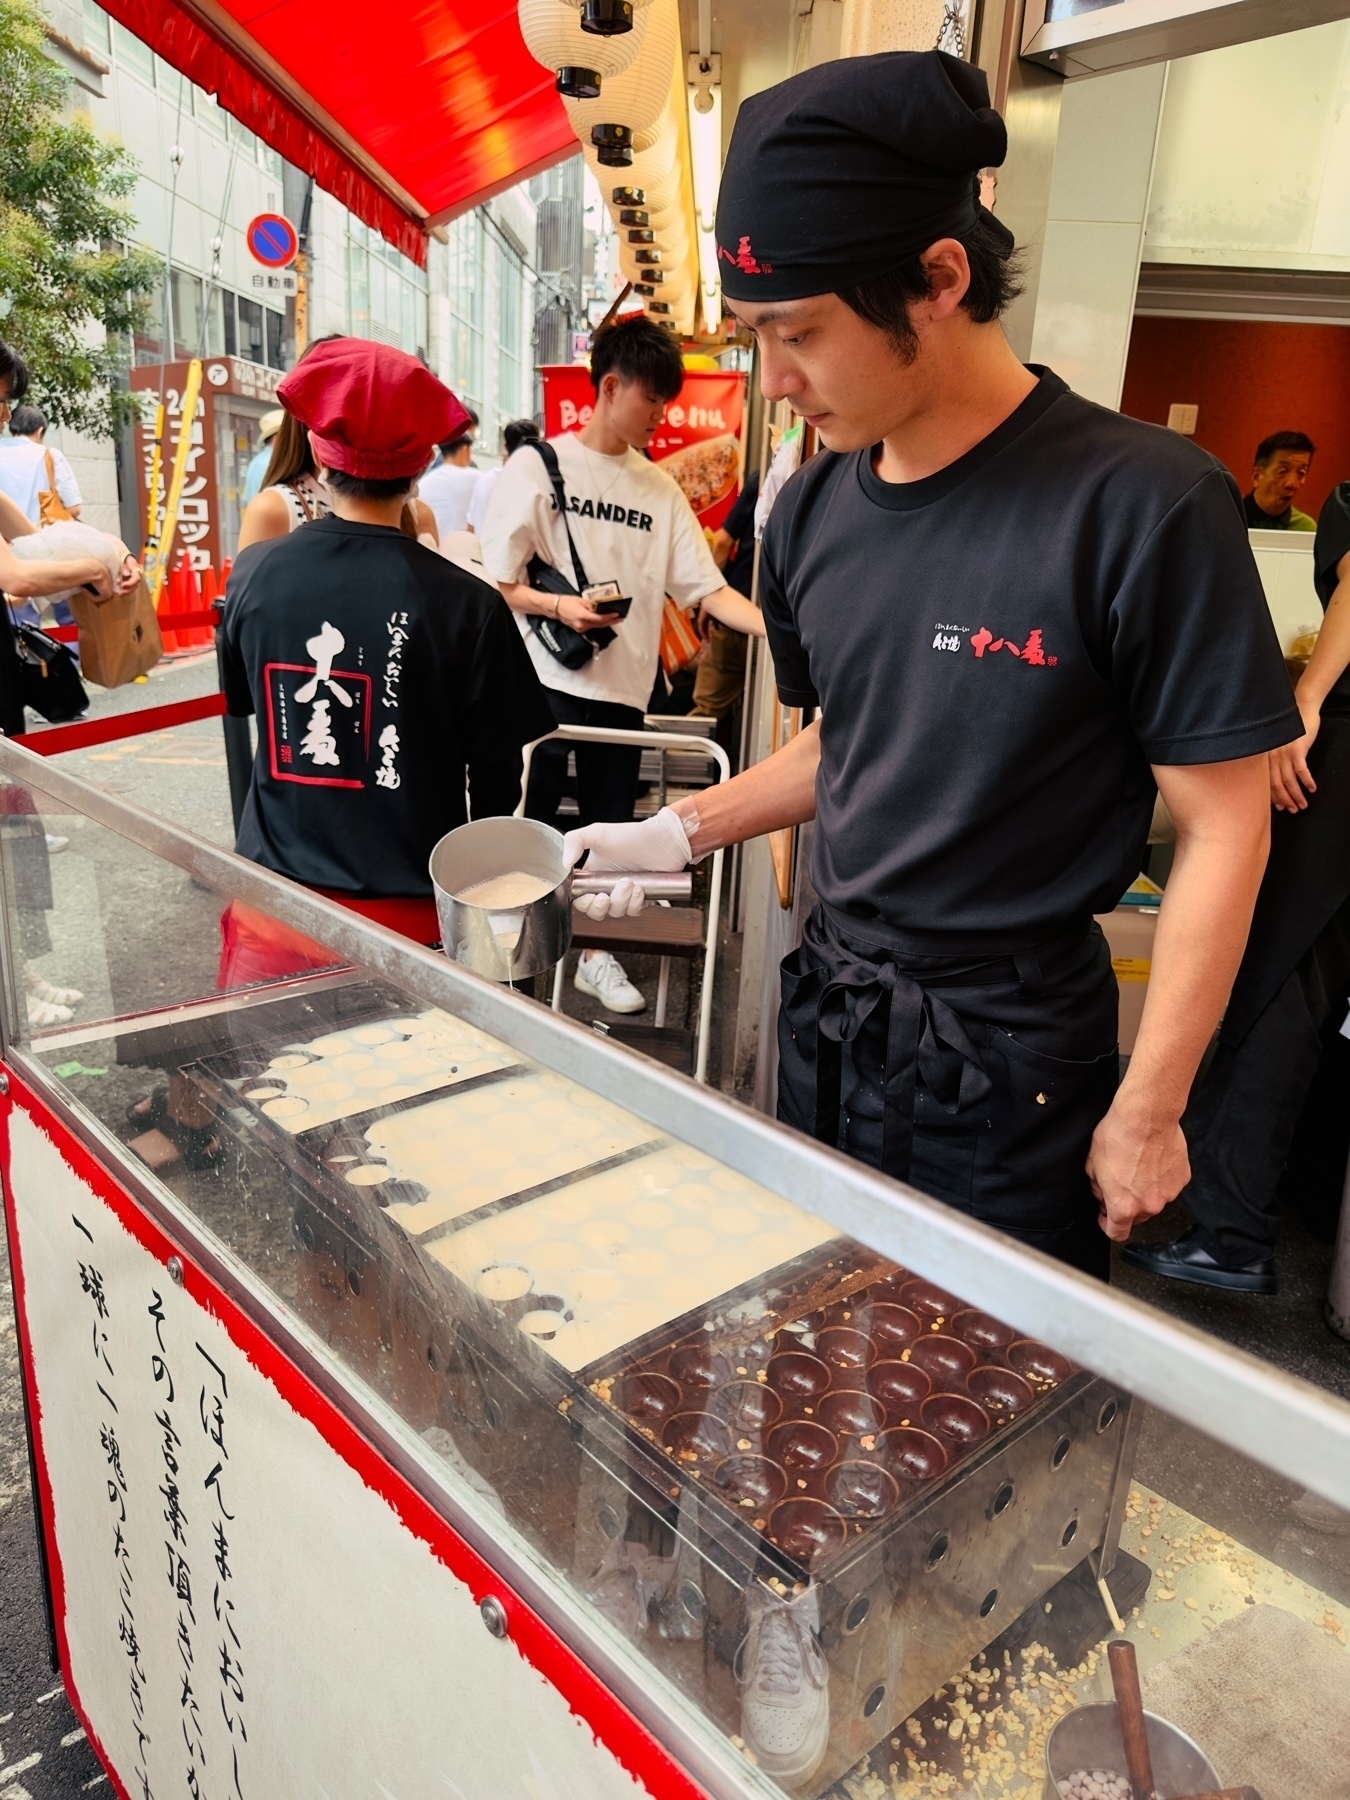 A street vendor in a black T-shirt and chef hat preparing food at a stall with a glass display showcasing rows of round, light-colored dough balls. Behind him, pedestrians and shops can be seen under a red awning.